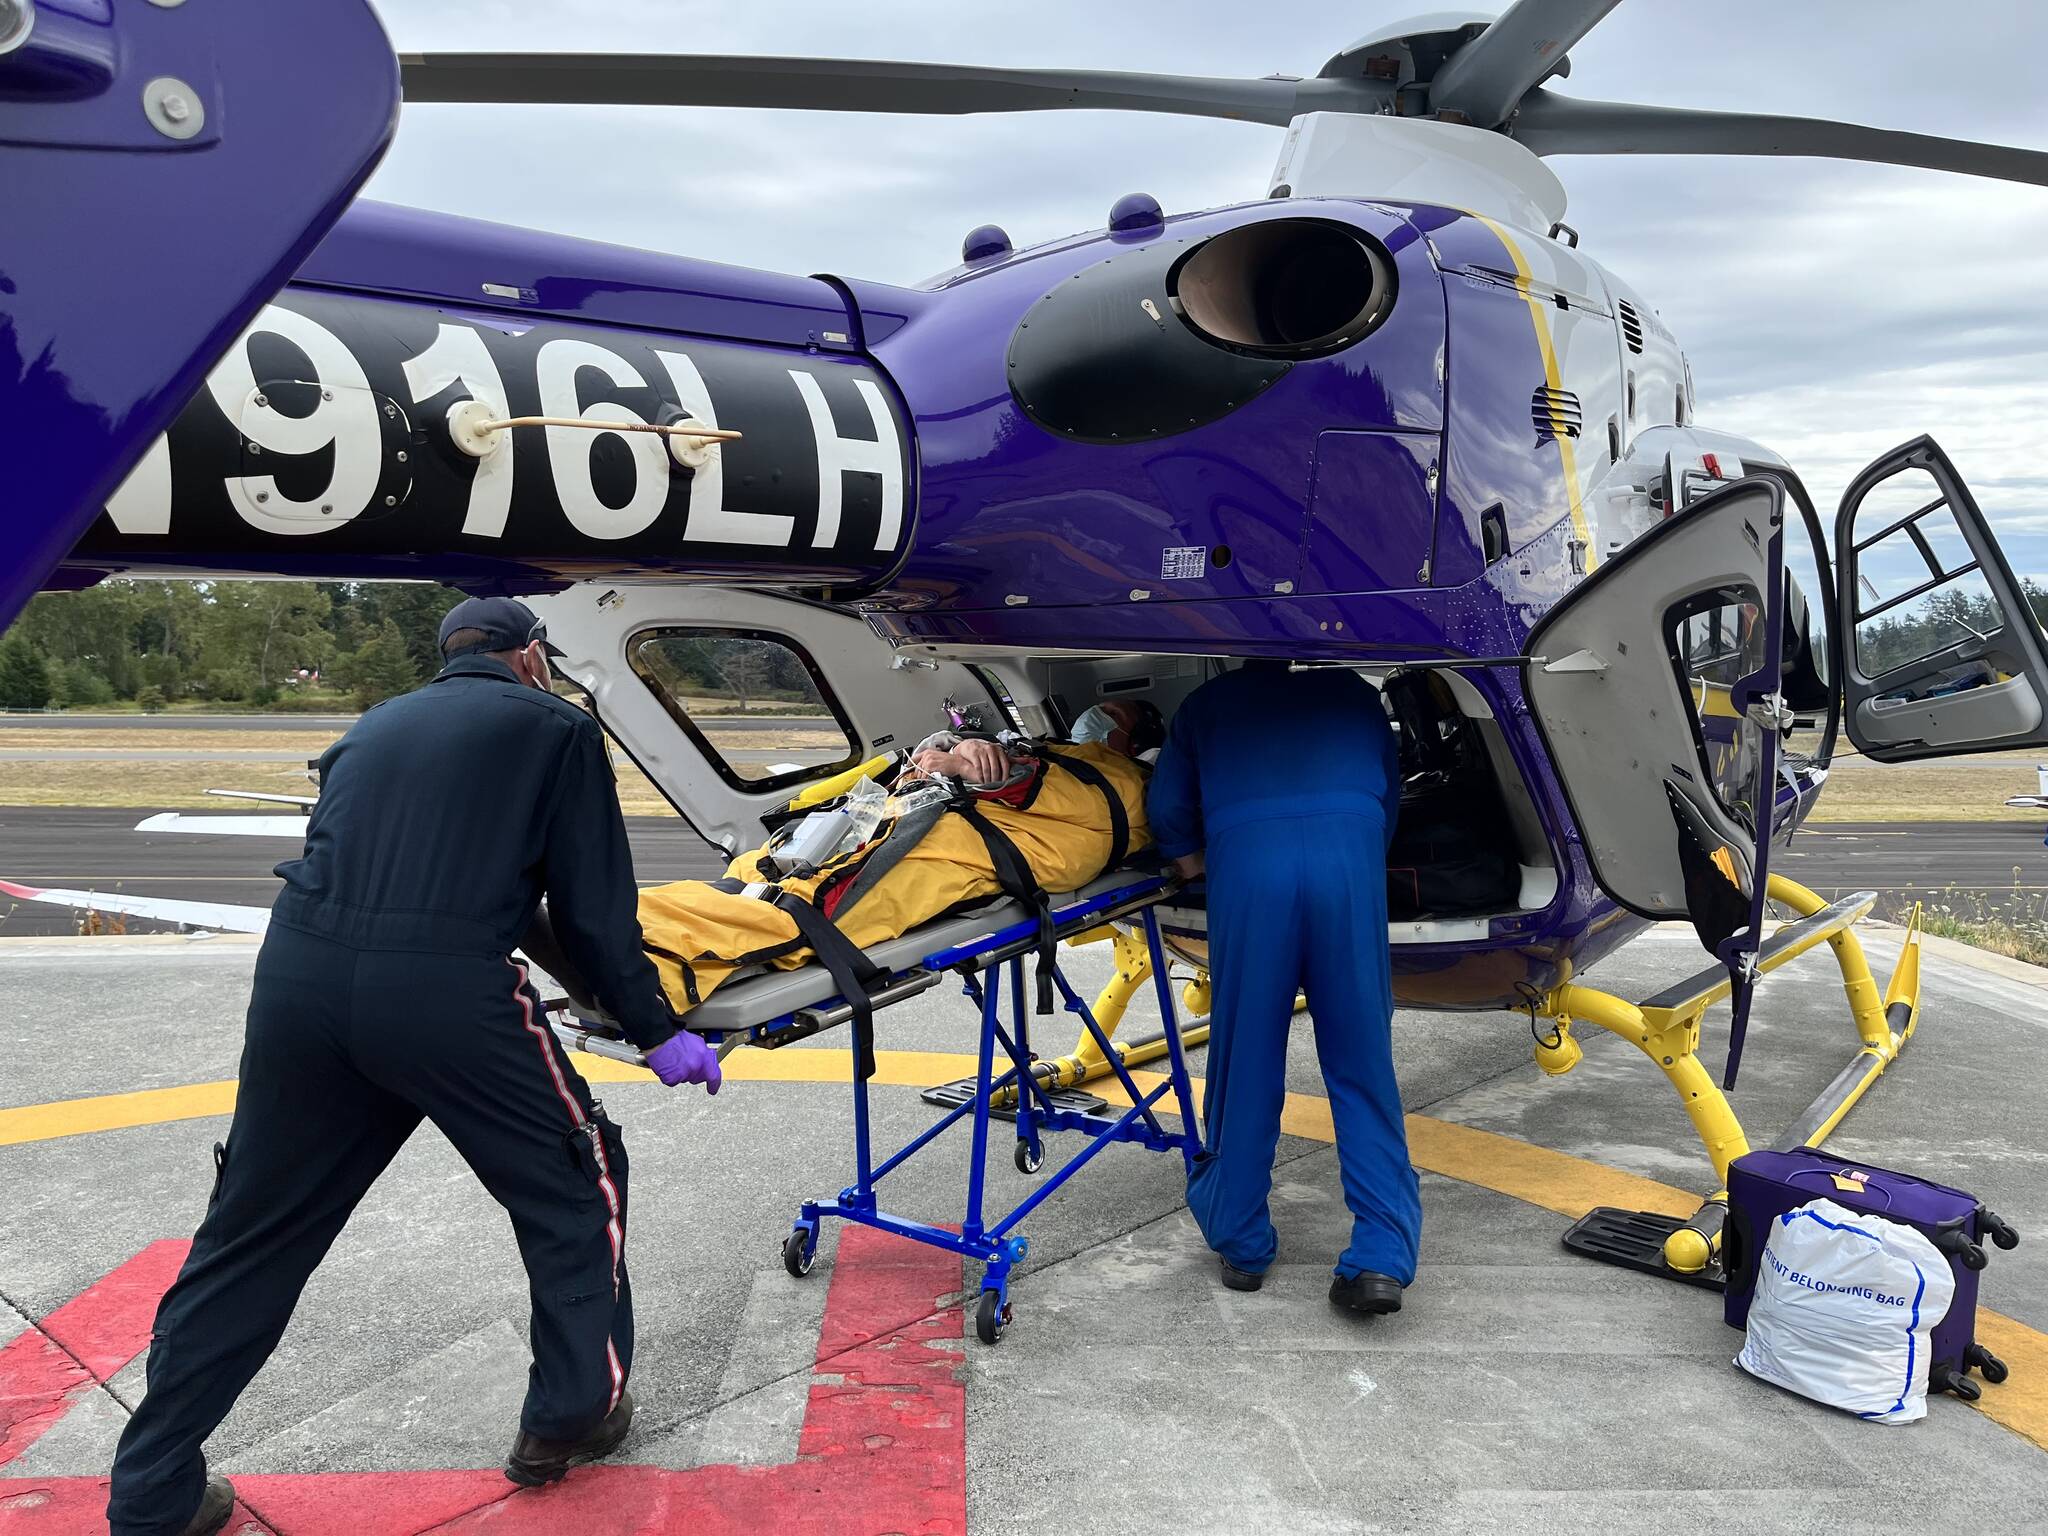 Colleen Smith/staff photo
A patient being flown with Airlift Northwest.